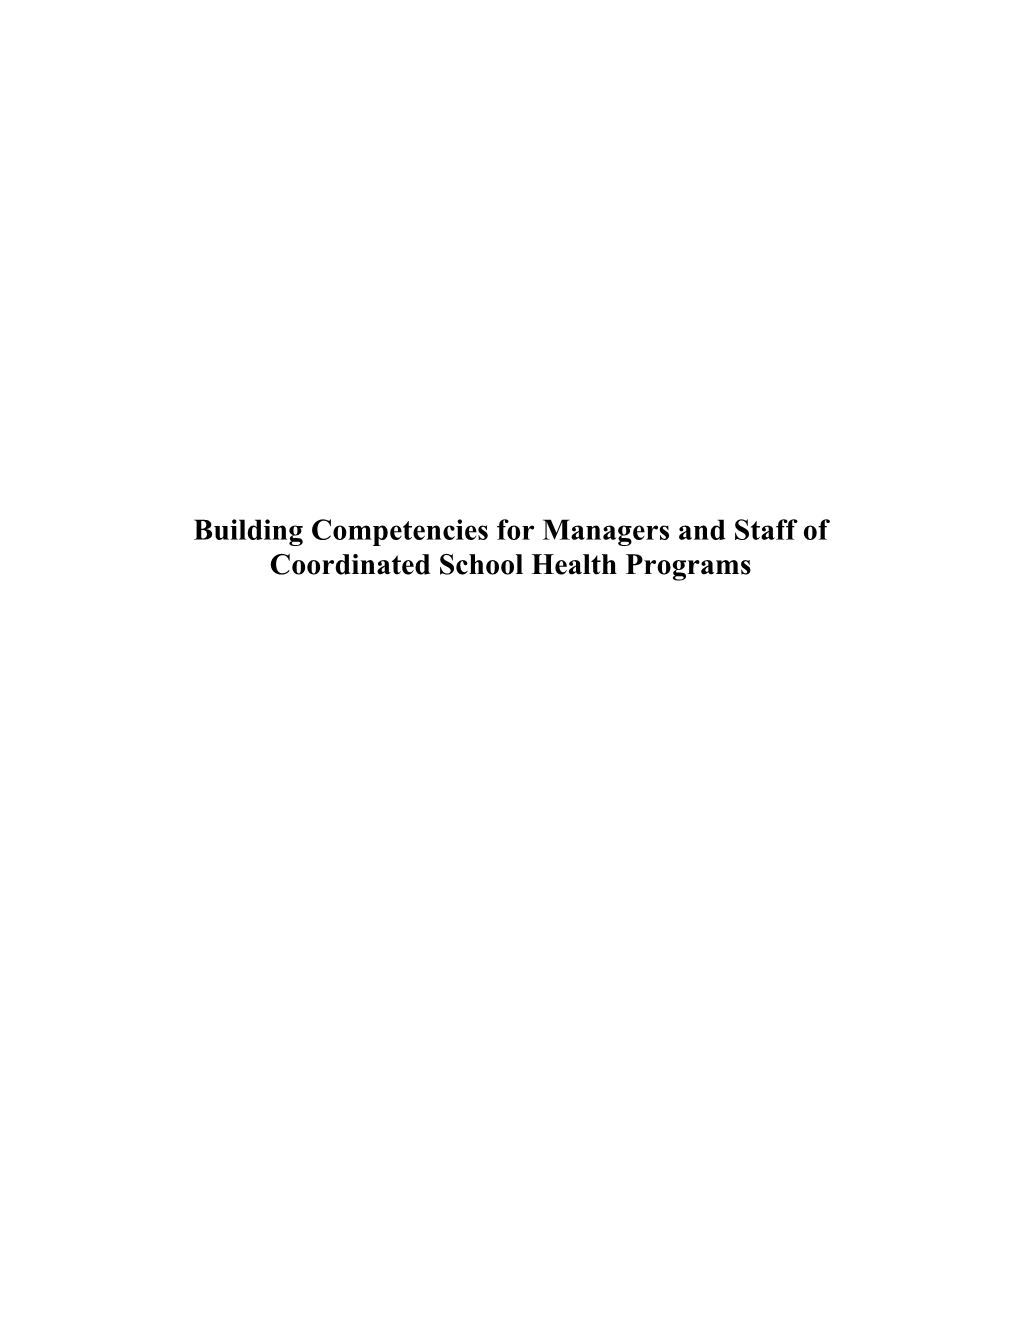 Building Competencies for Managers and Staff of Coordinated School Health Programs